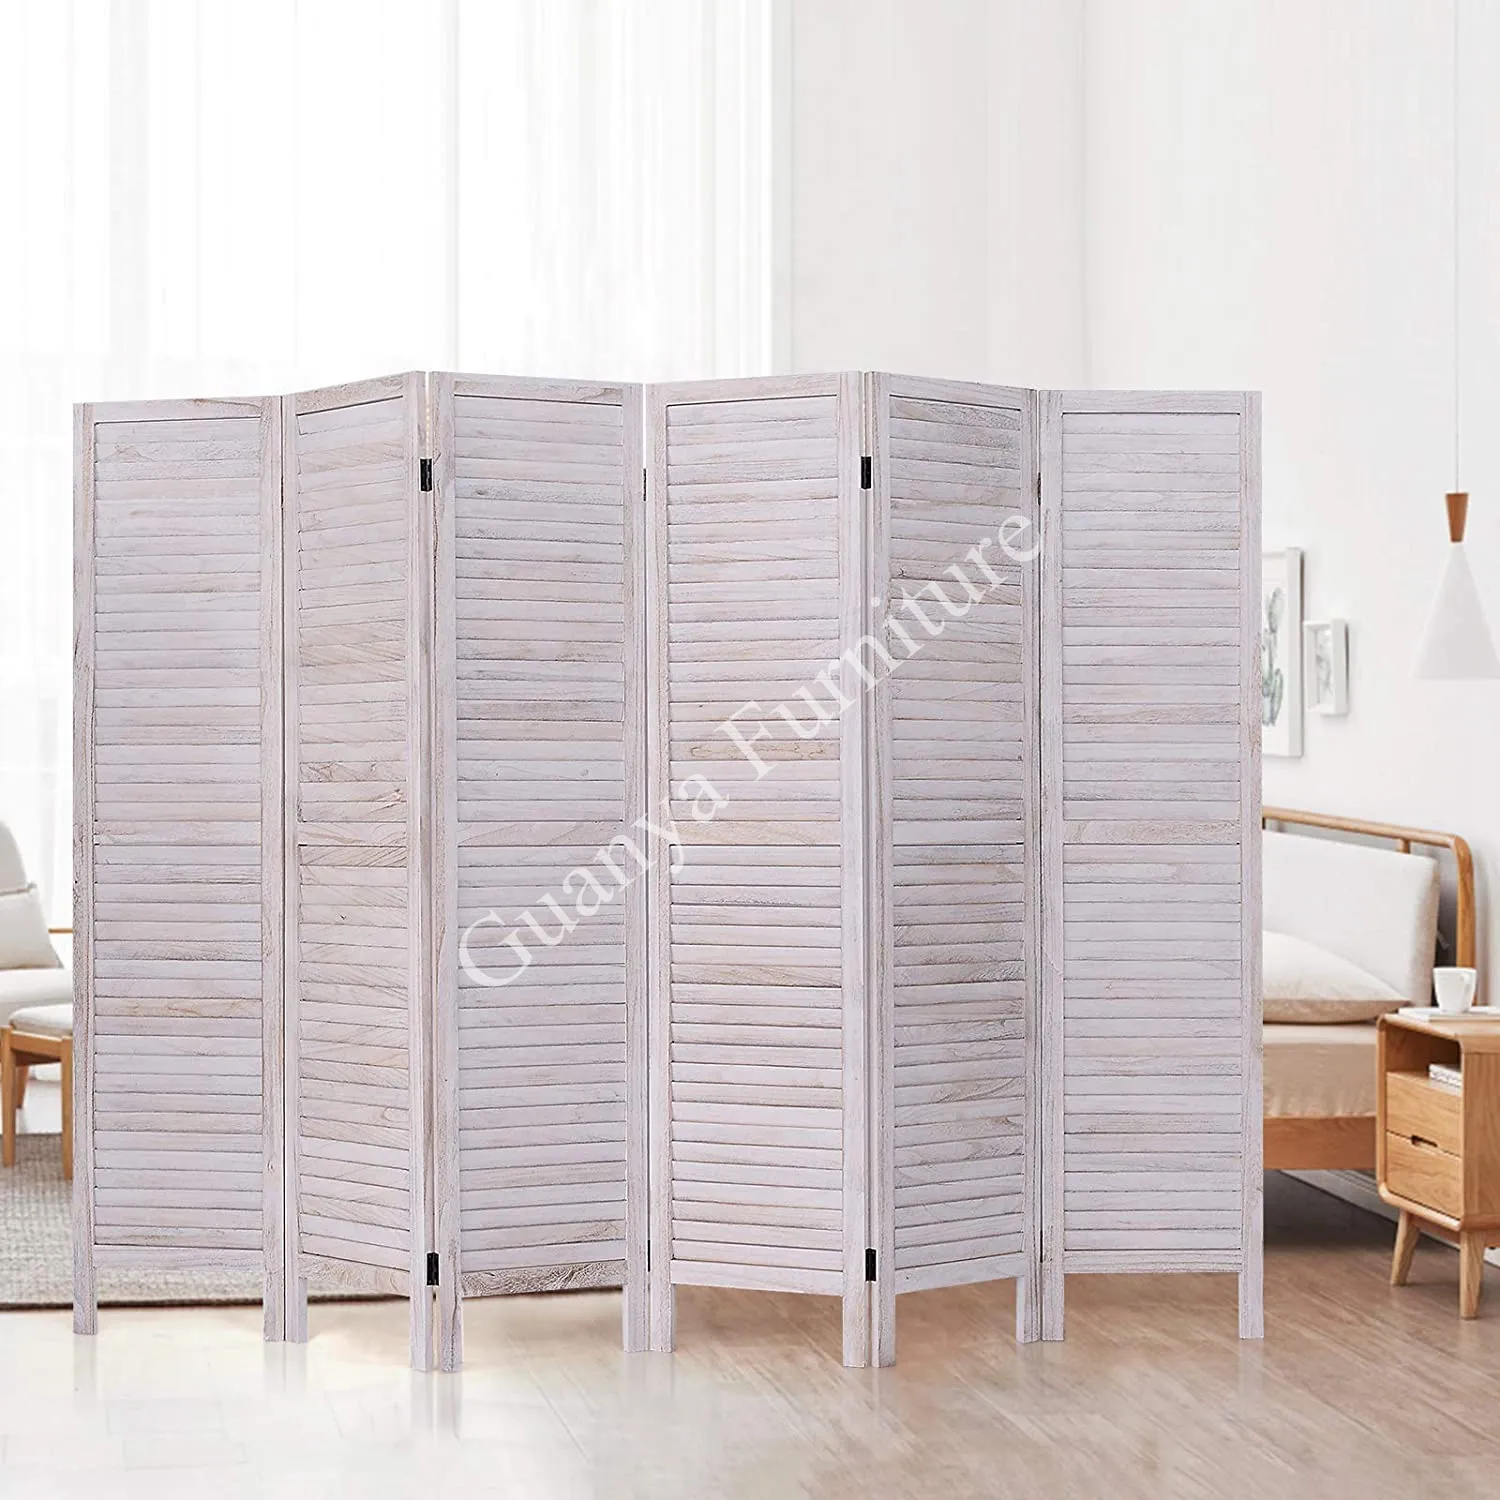 GUANYA 6 Panels Privacy Folding Wood Divider for Home Office Room Divider Screen